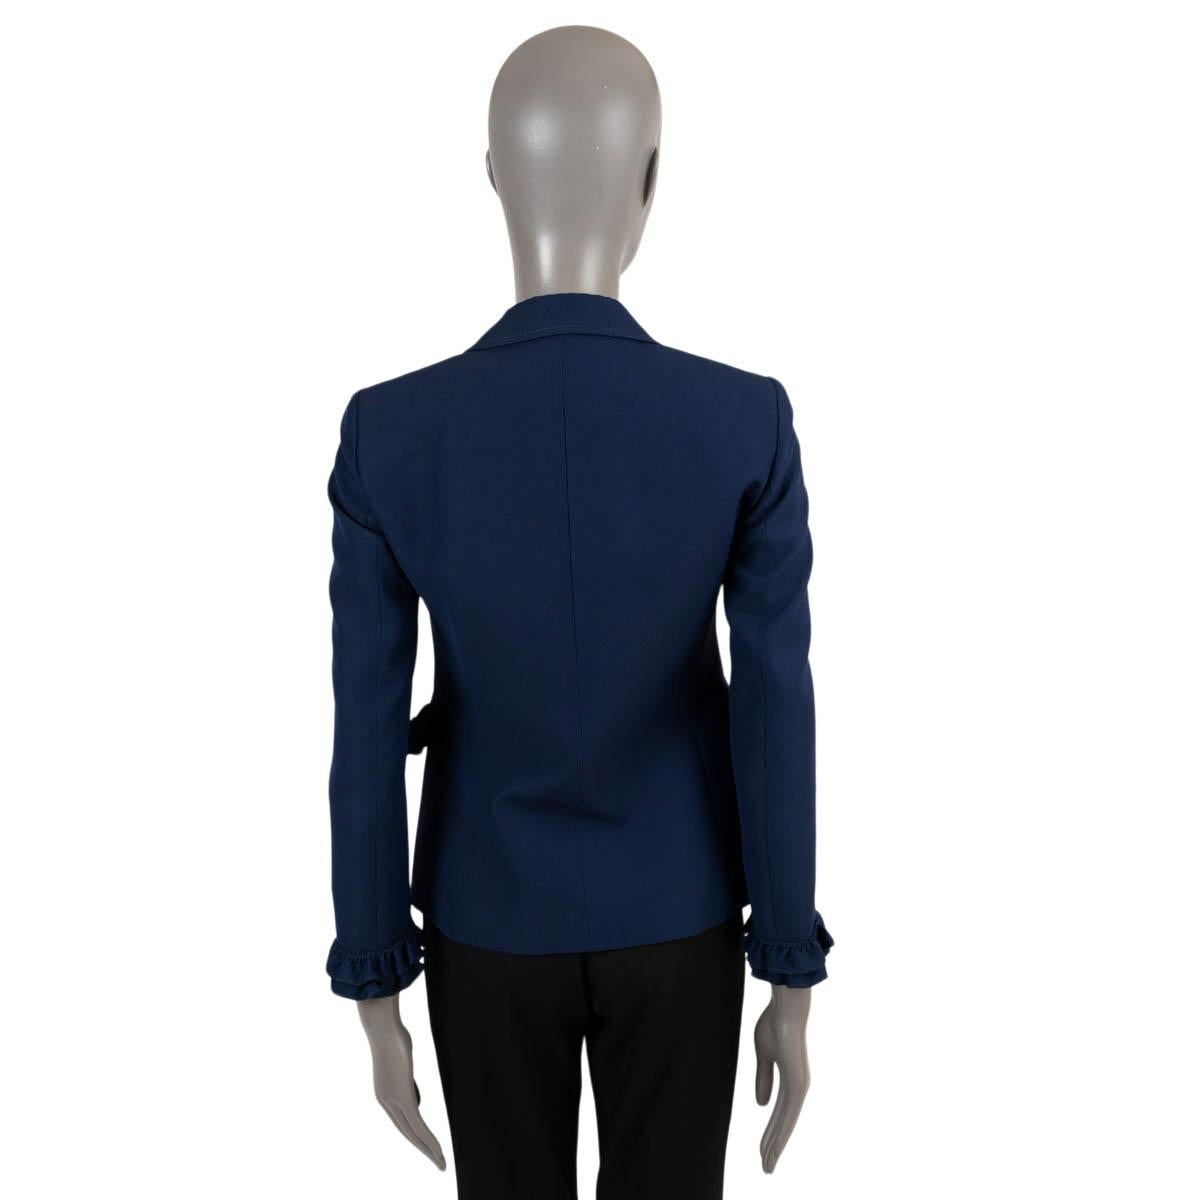 GUCCI navy blue 2016 PEARL BUTTON RUFFLED CREPE Blazer Jacket 38 XS In Excellent Condition For Sale In Zürich, CH